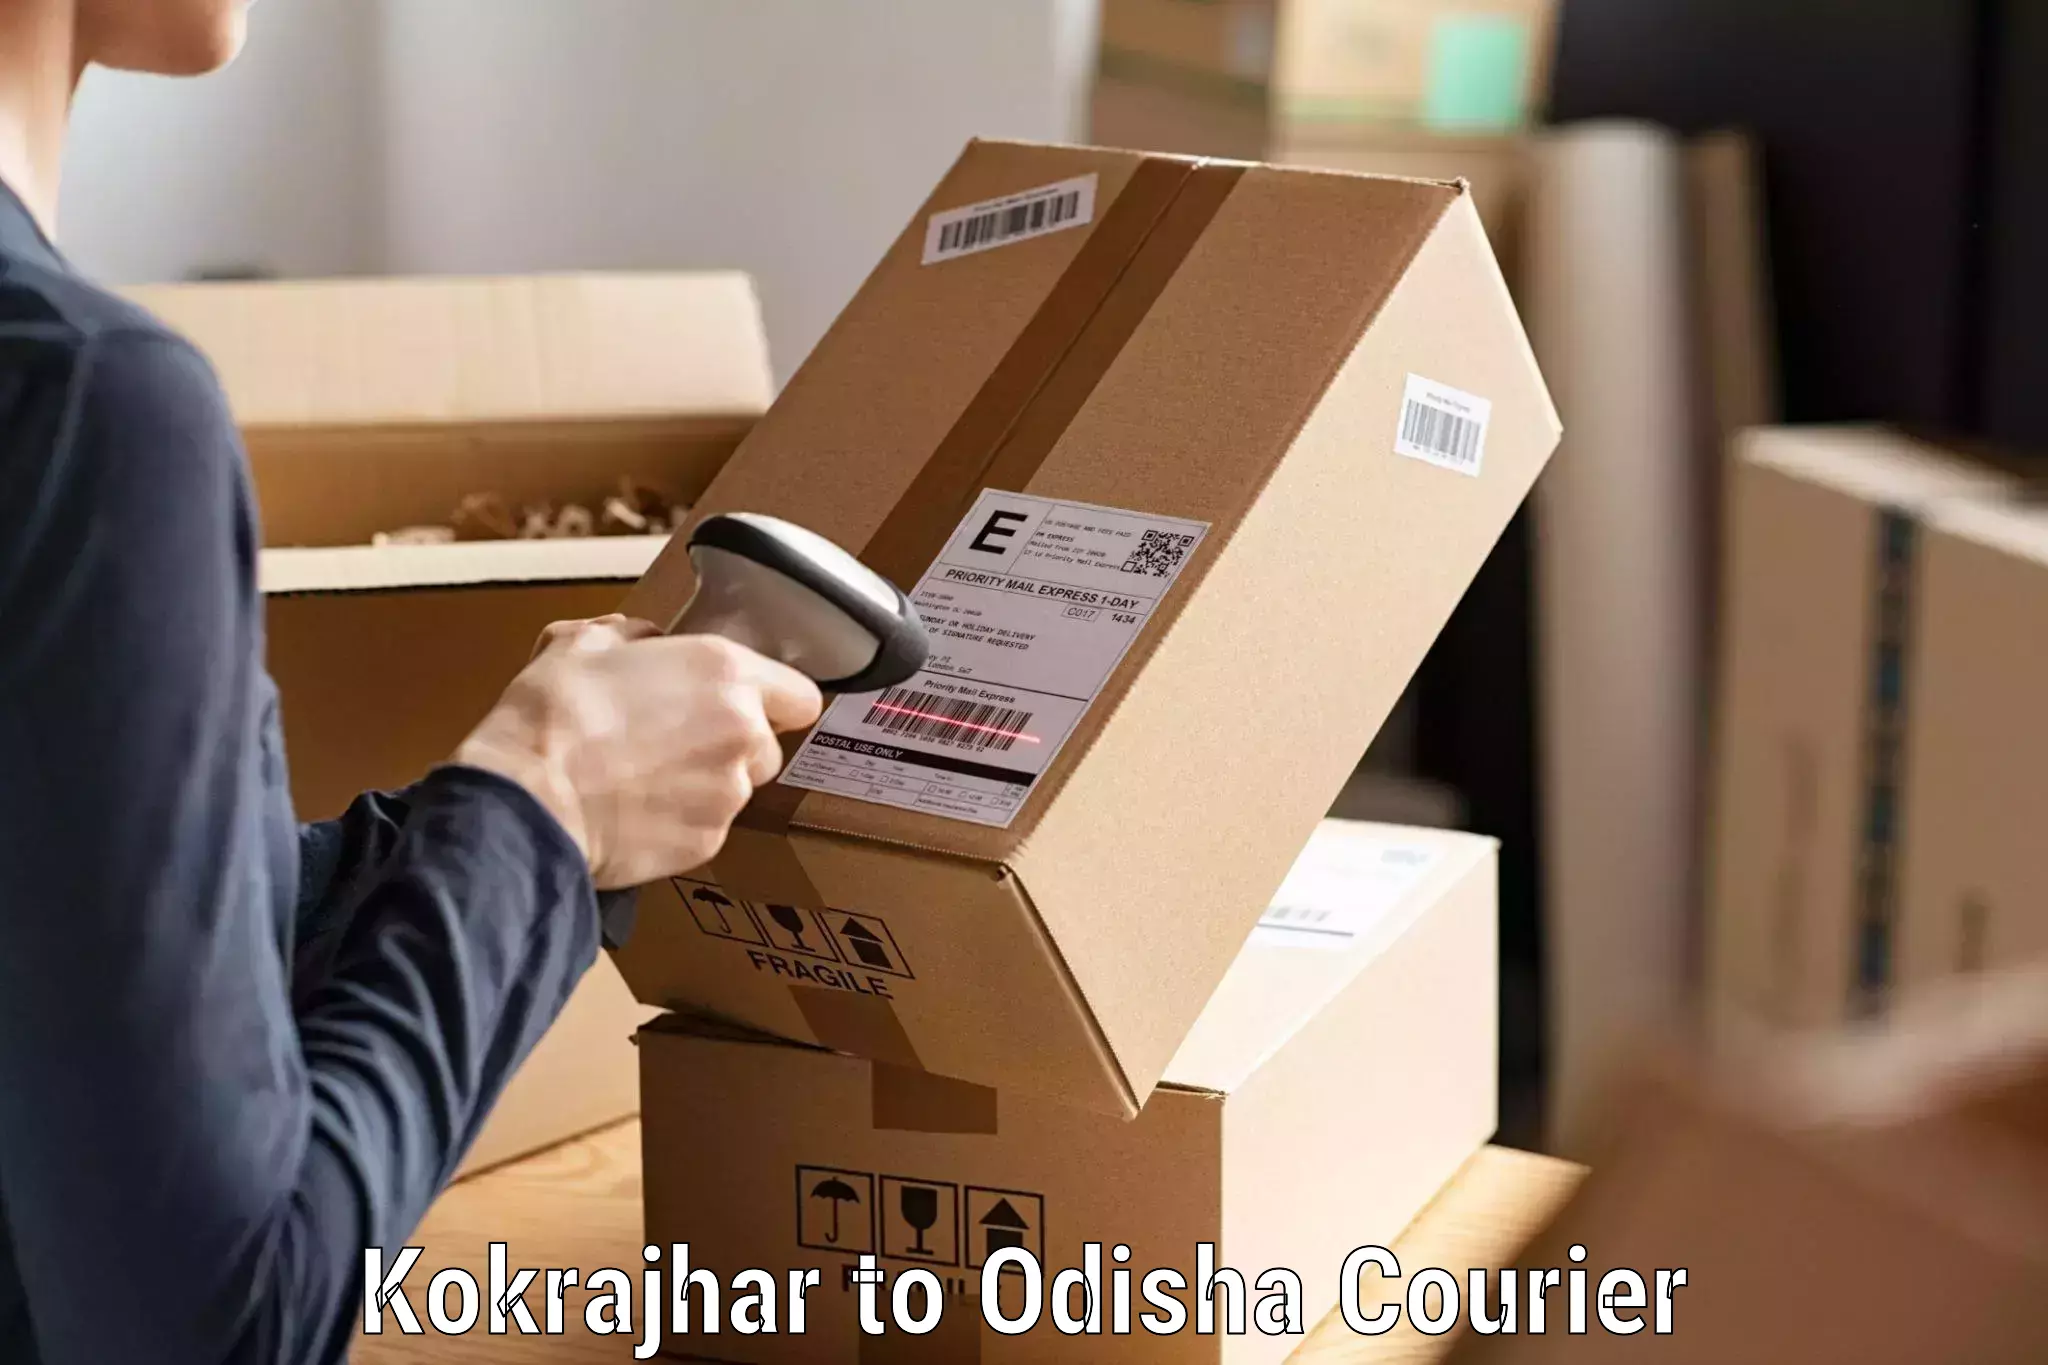 Express package services Kokrajhar to Duburi